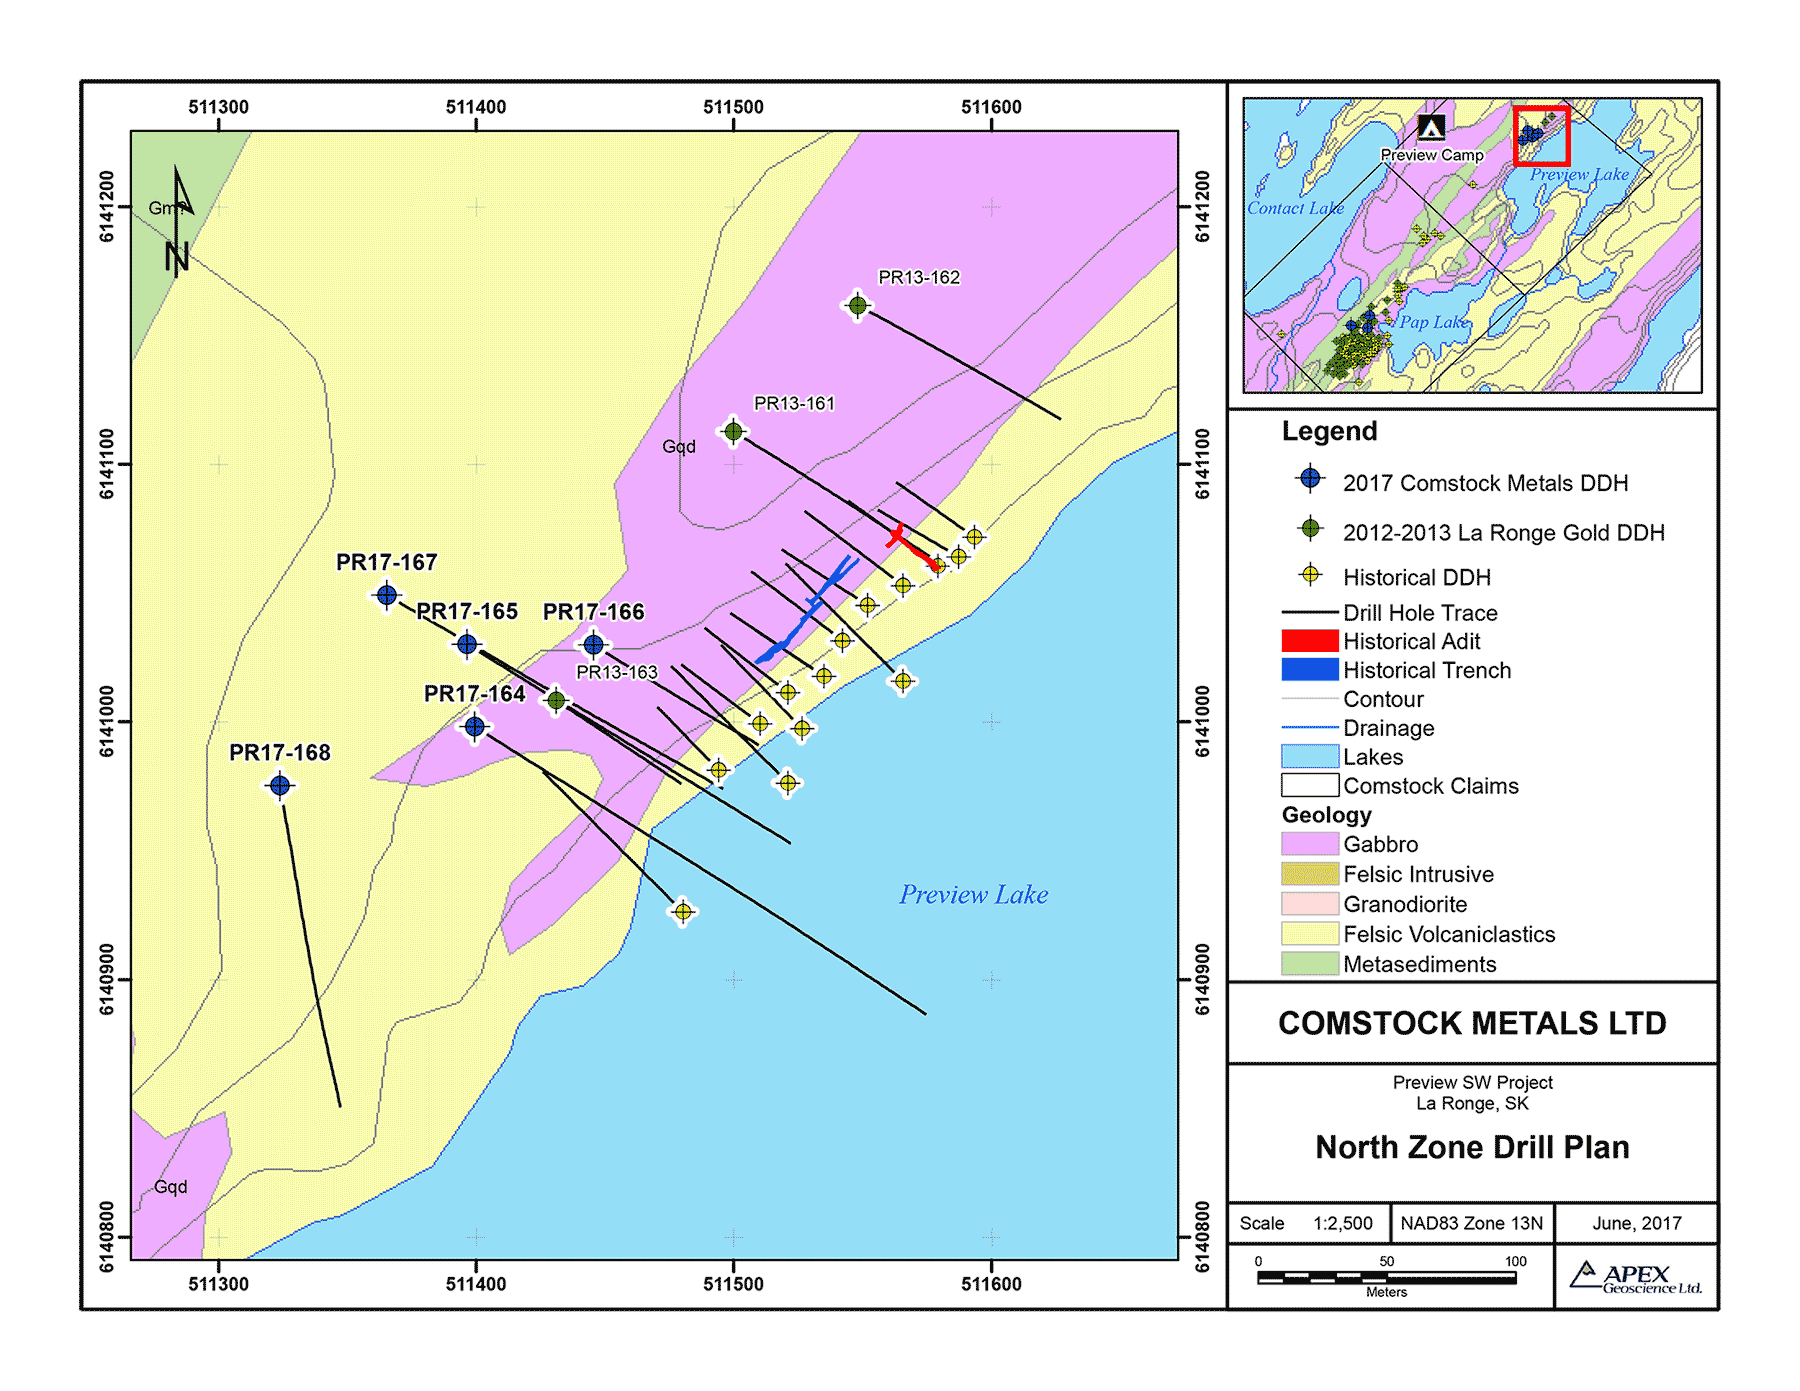 Preview SW North Zone Drill Plan